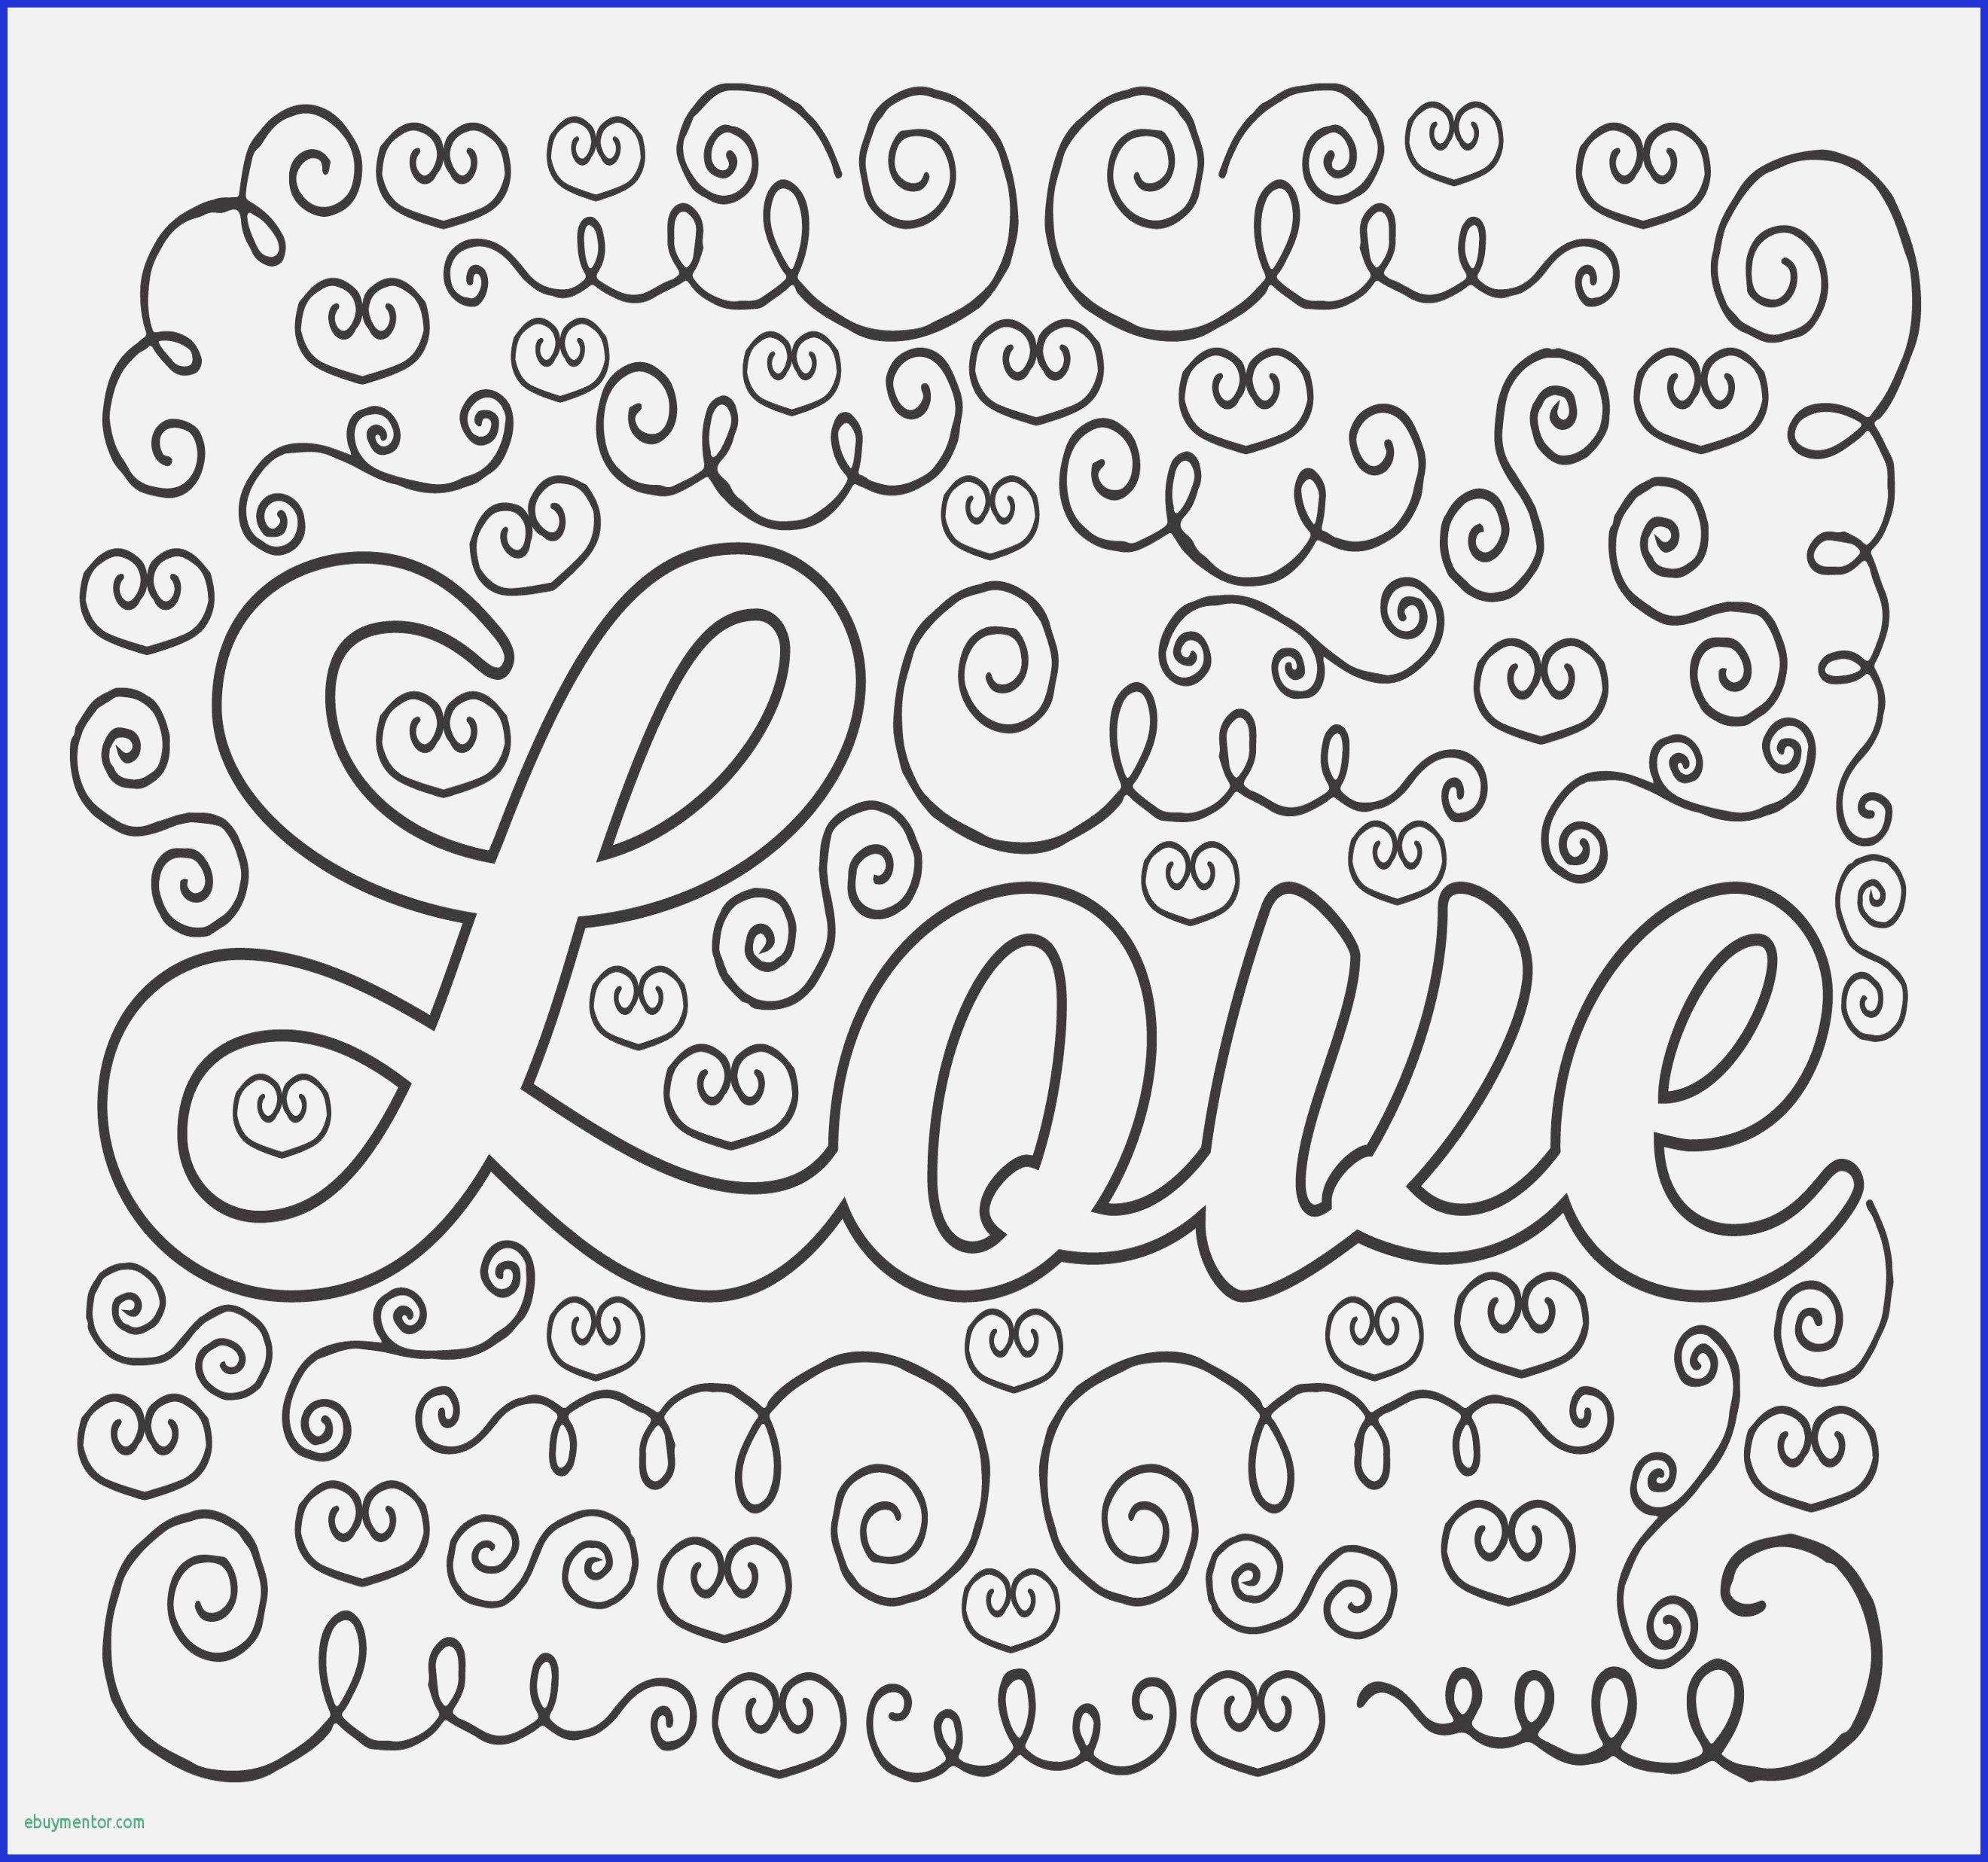 Coloring Ideas : Free Printable Christian Coloring Pages Beautiful - Free Printable Christian Coloring Pages